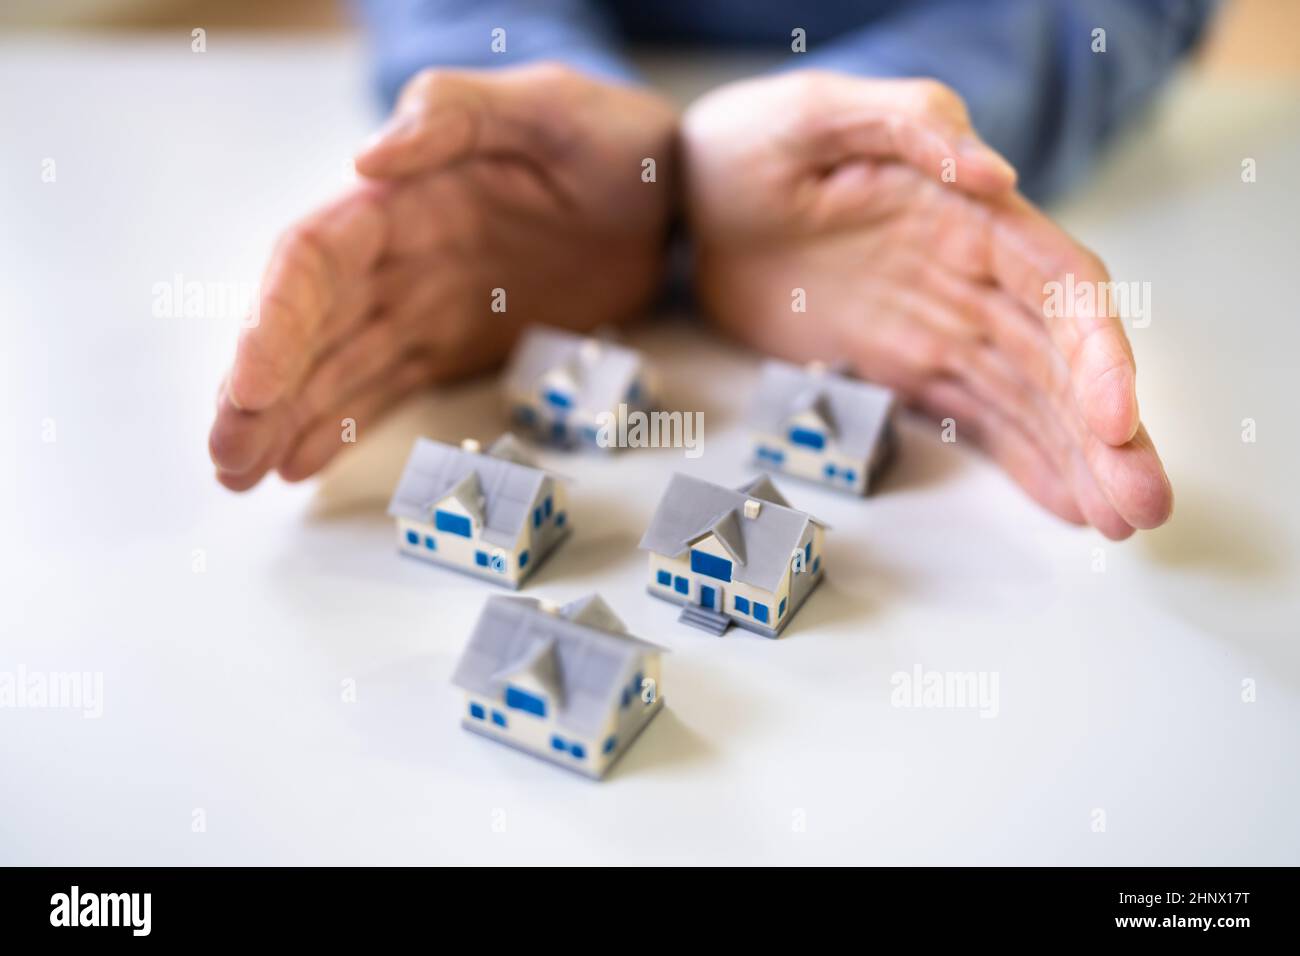 Hand Protecting Miniature Houses On The Desk Stock Photo